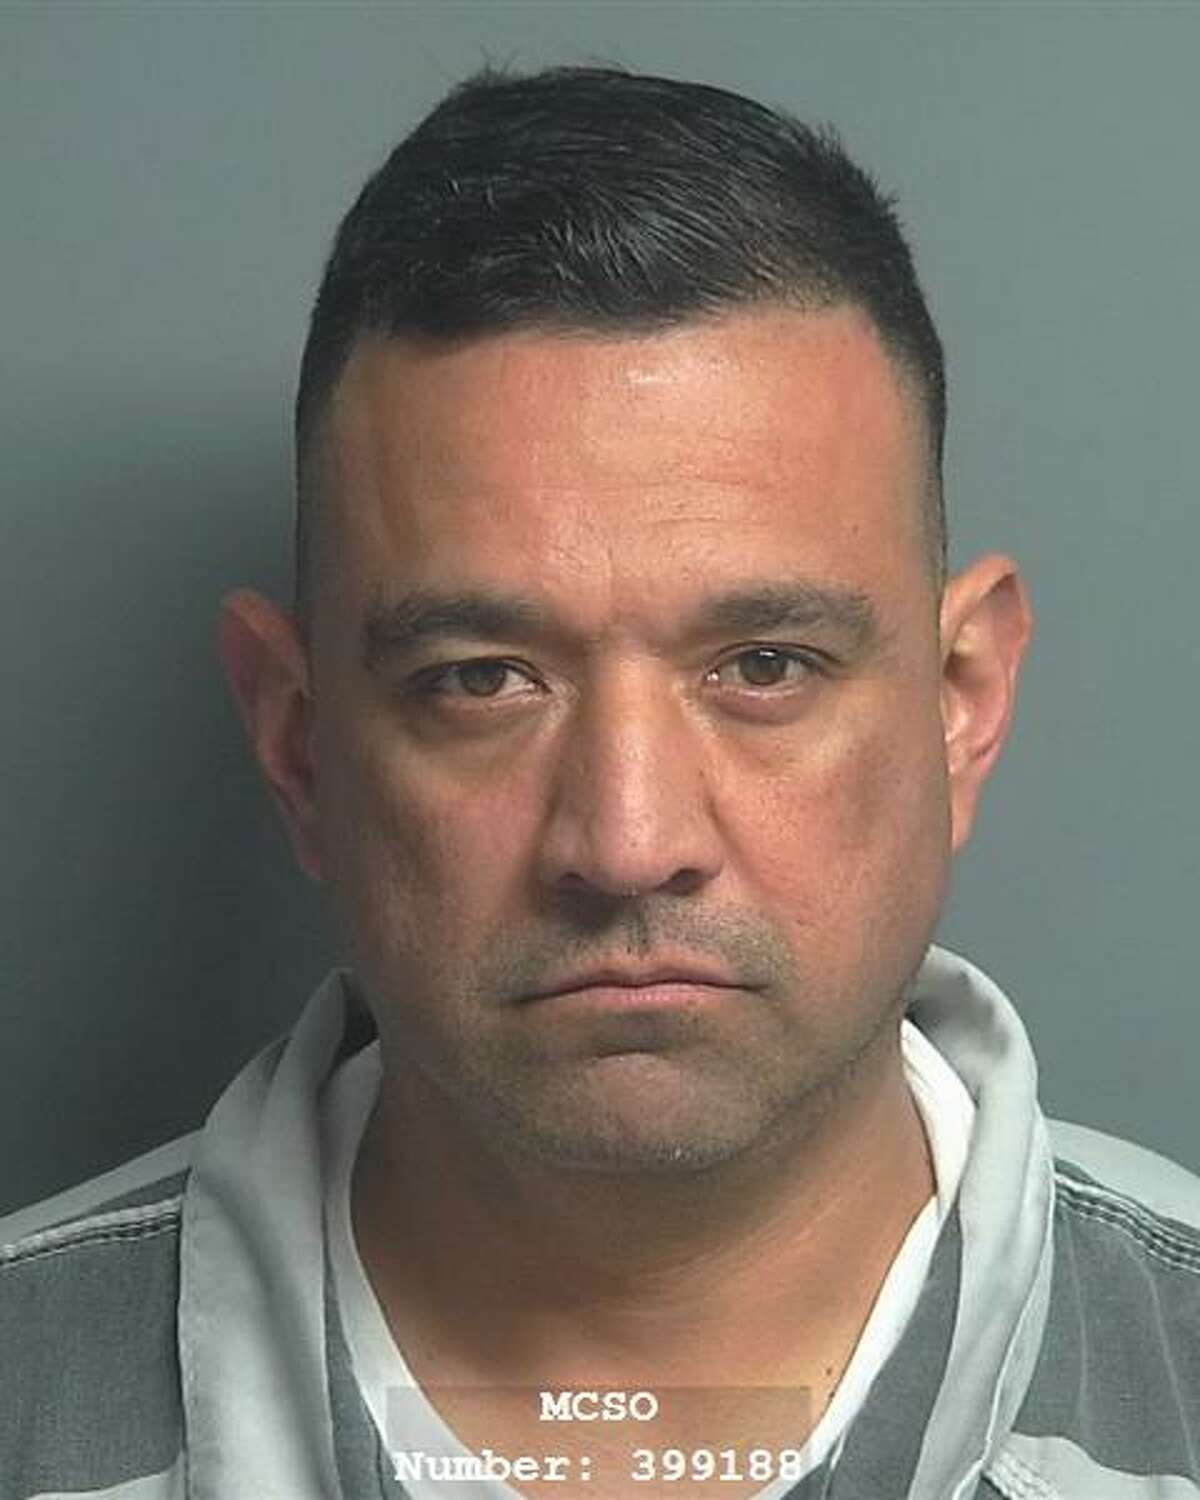 Frank Rosas, 48, of Porter, was convicted and sentenced for promotion or possession of child pornography, a third-degree felony.